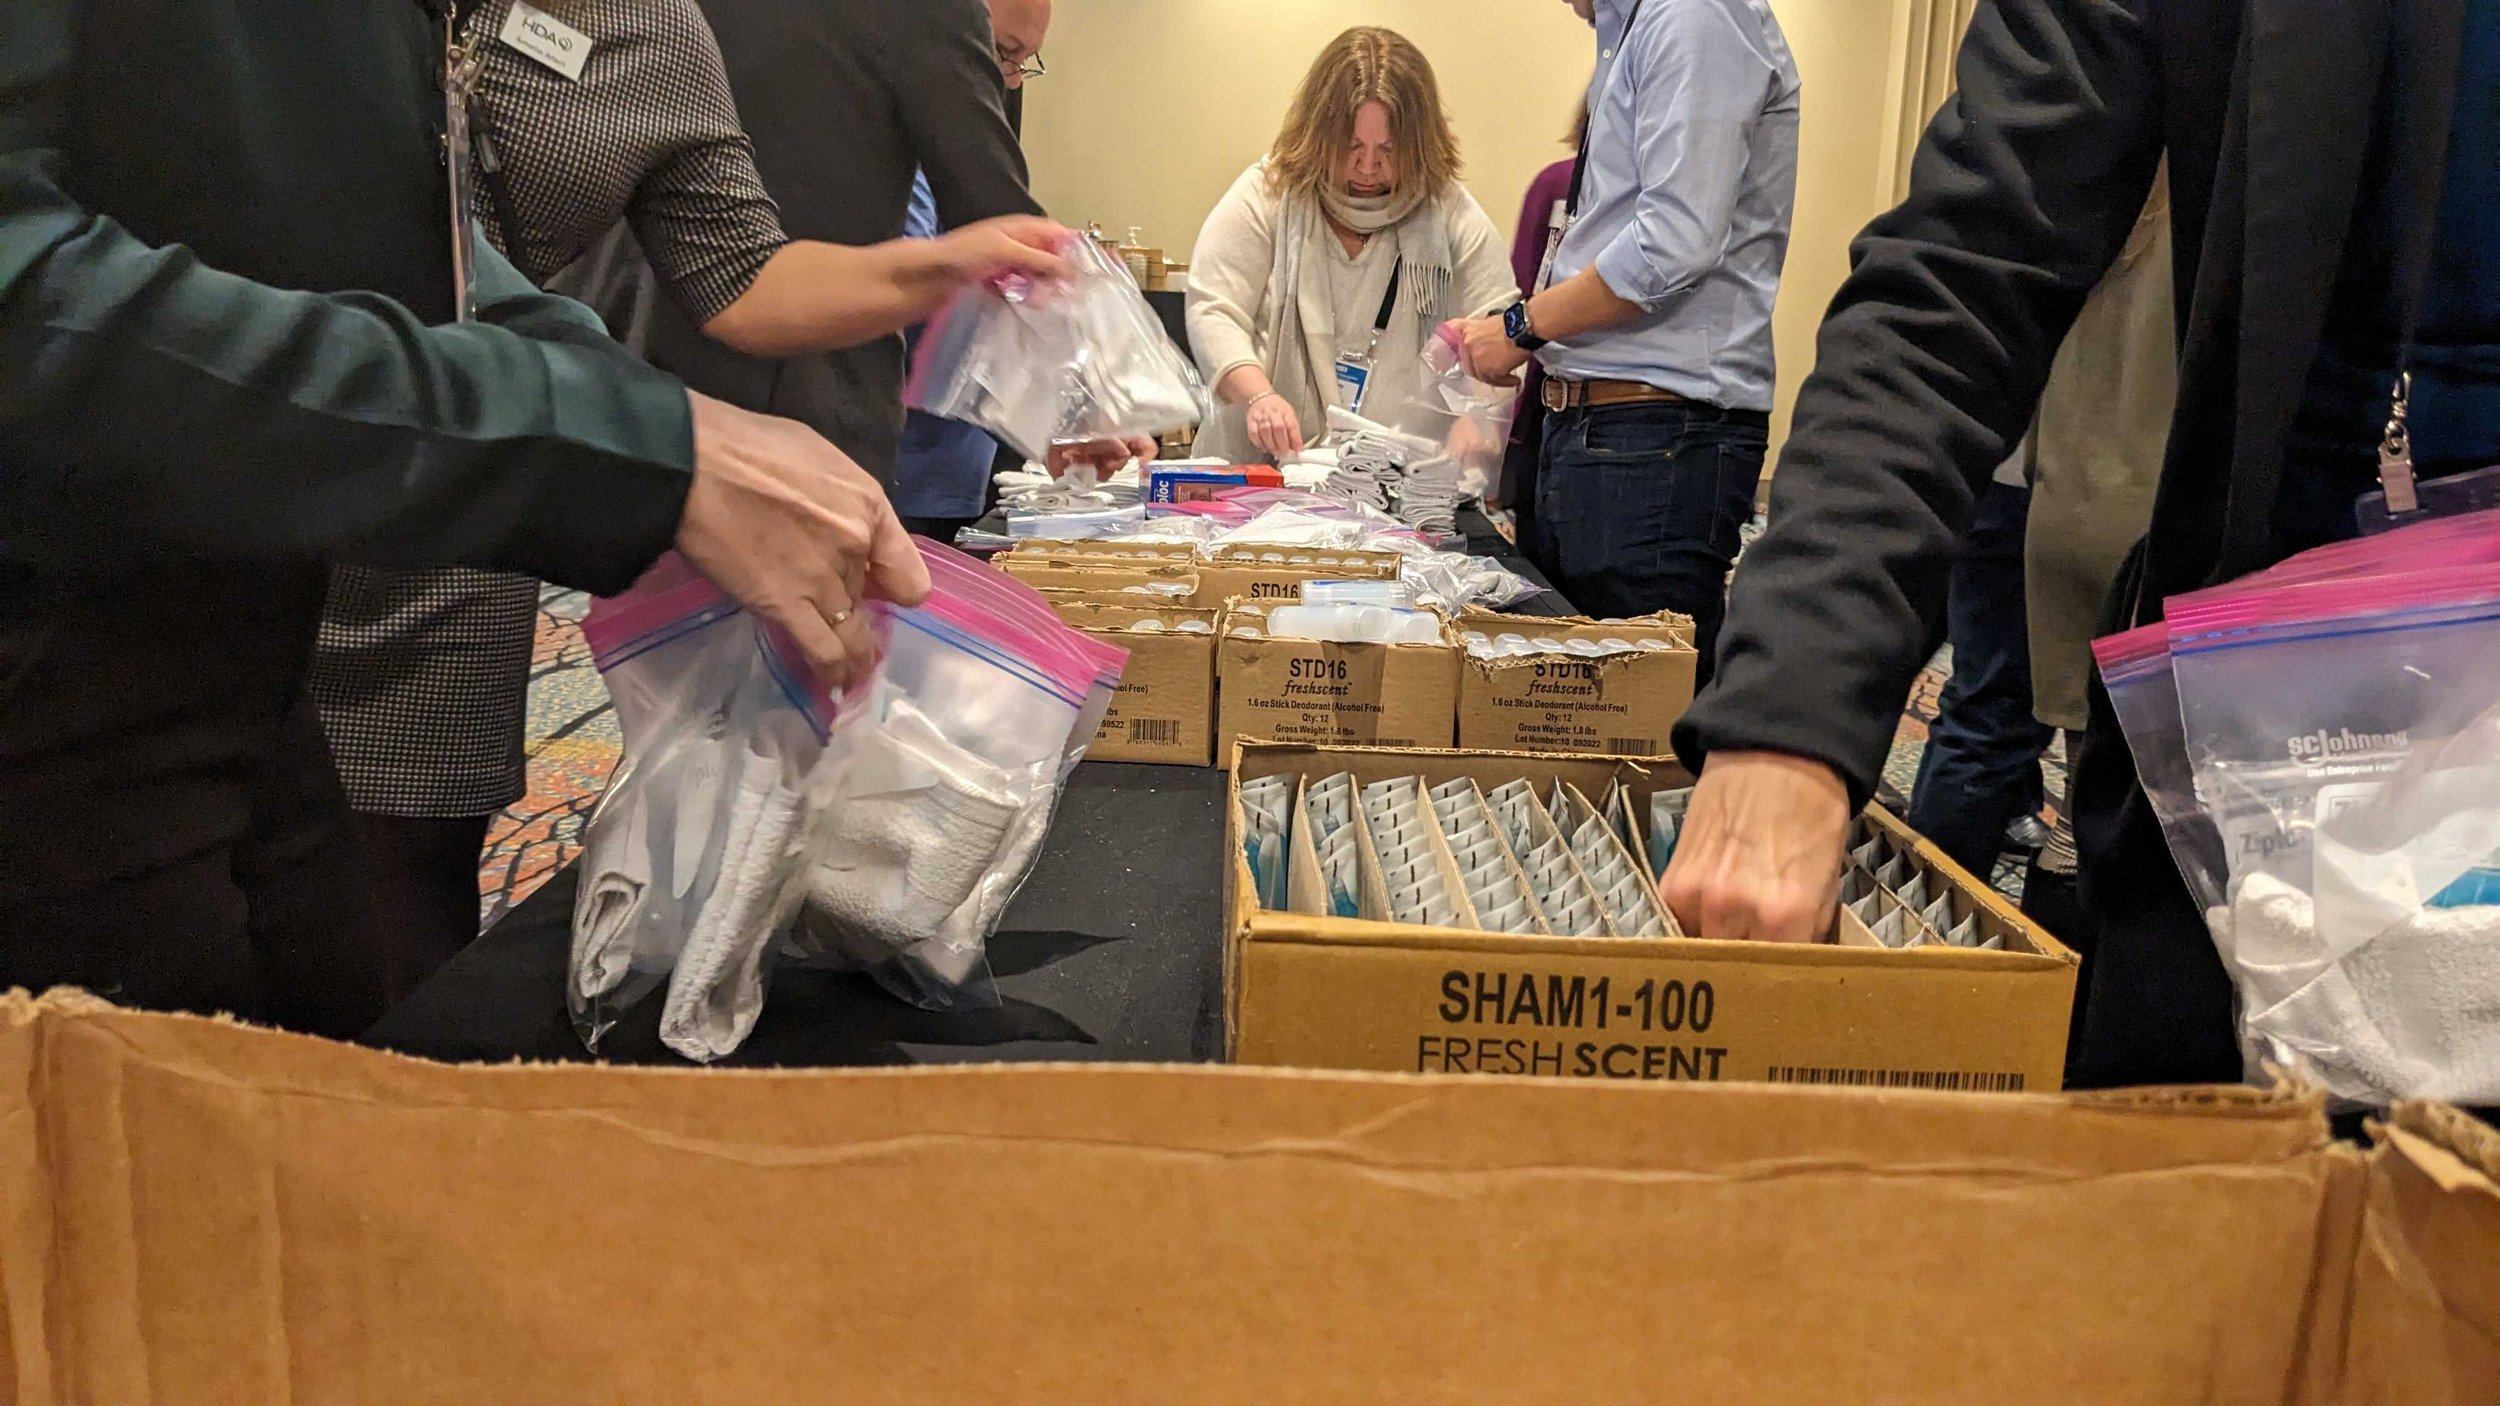  Volunteers assemble hygiene kits on March 14, 2023, during the Healthcare Distribution Alliance conference at the JW Marriott in downtown Indianapolis. The organization partnered with United Way of Central Indiana to offer the service project during